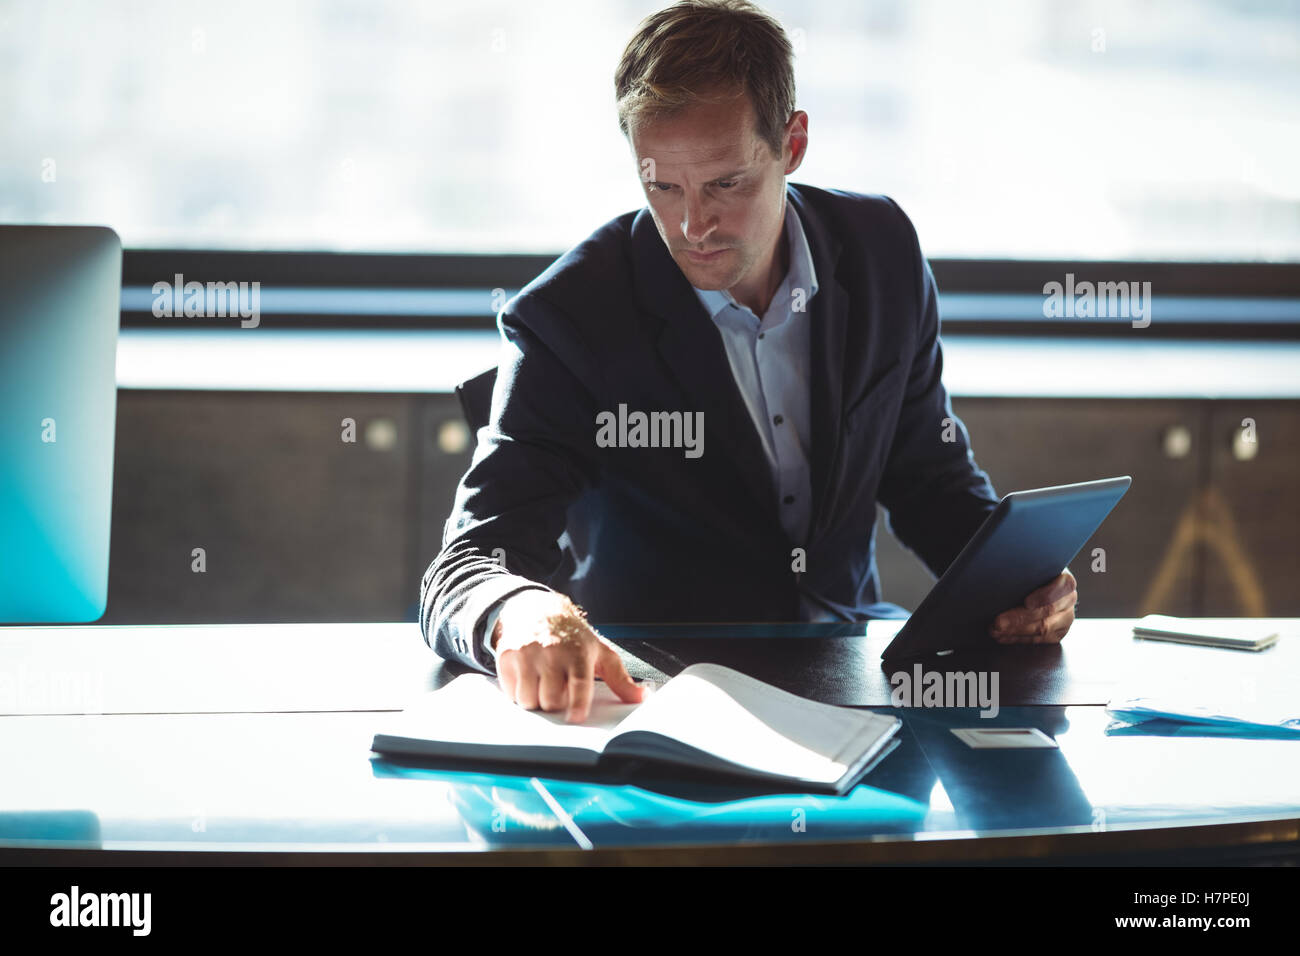 Businessman checking his diary while using digital tablet Stock Photo